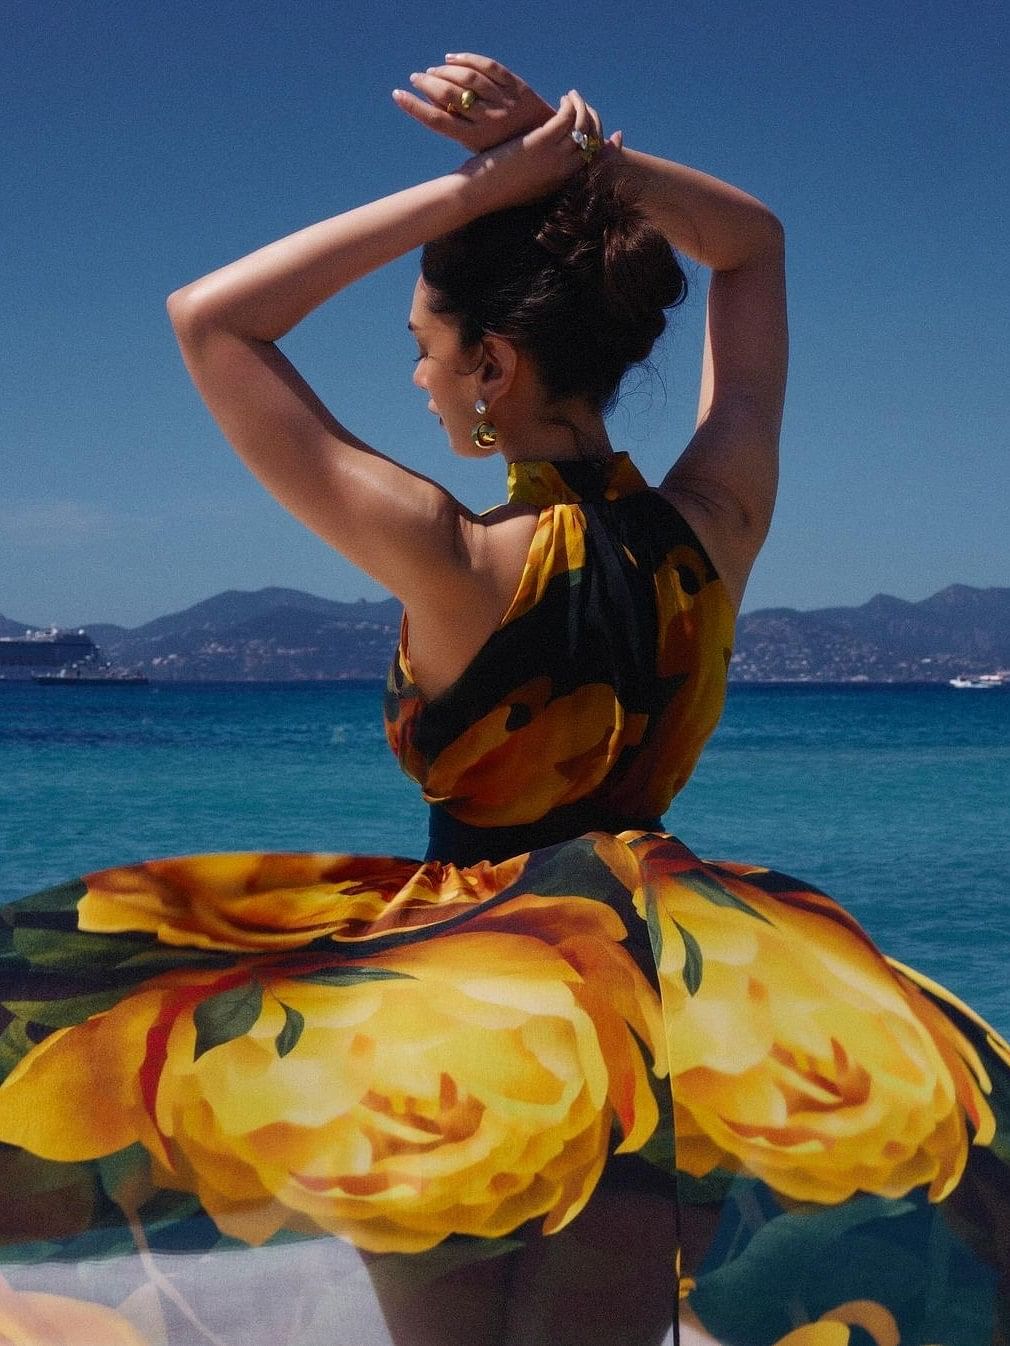 The dress, featured a bold yellow floral prints reminiscing of blooming peonies, exuding a cheerful energy.